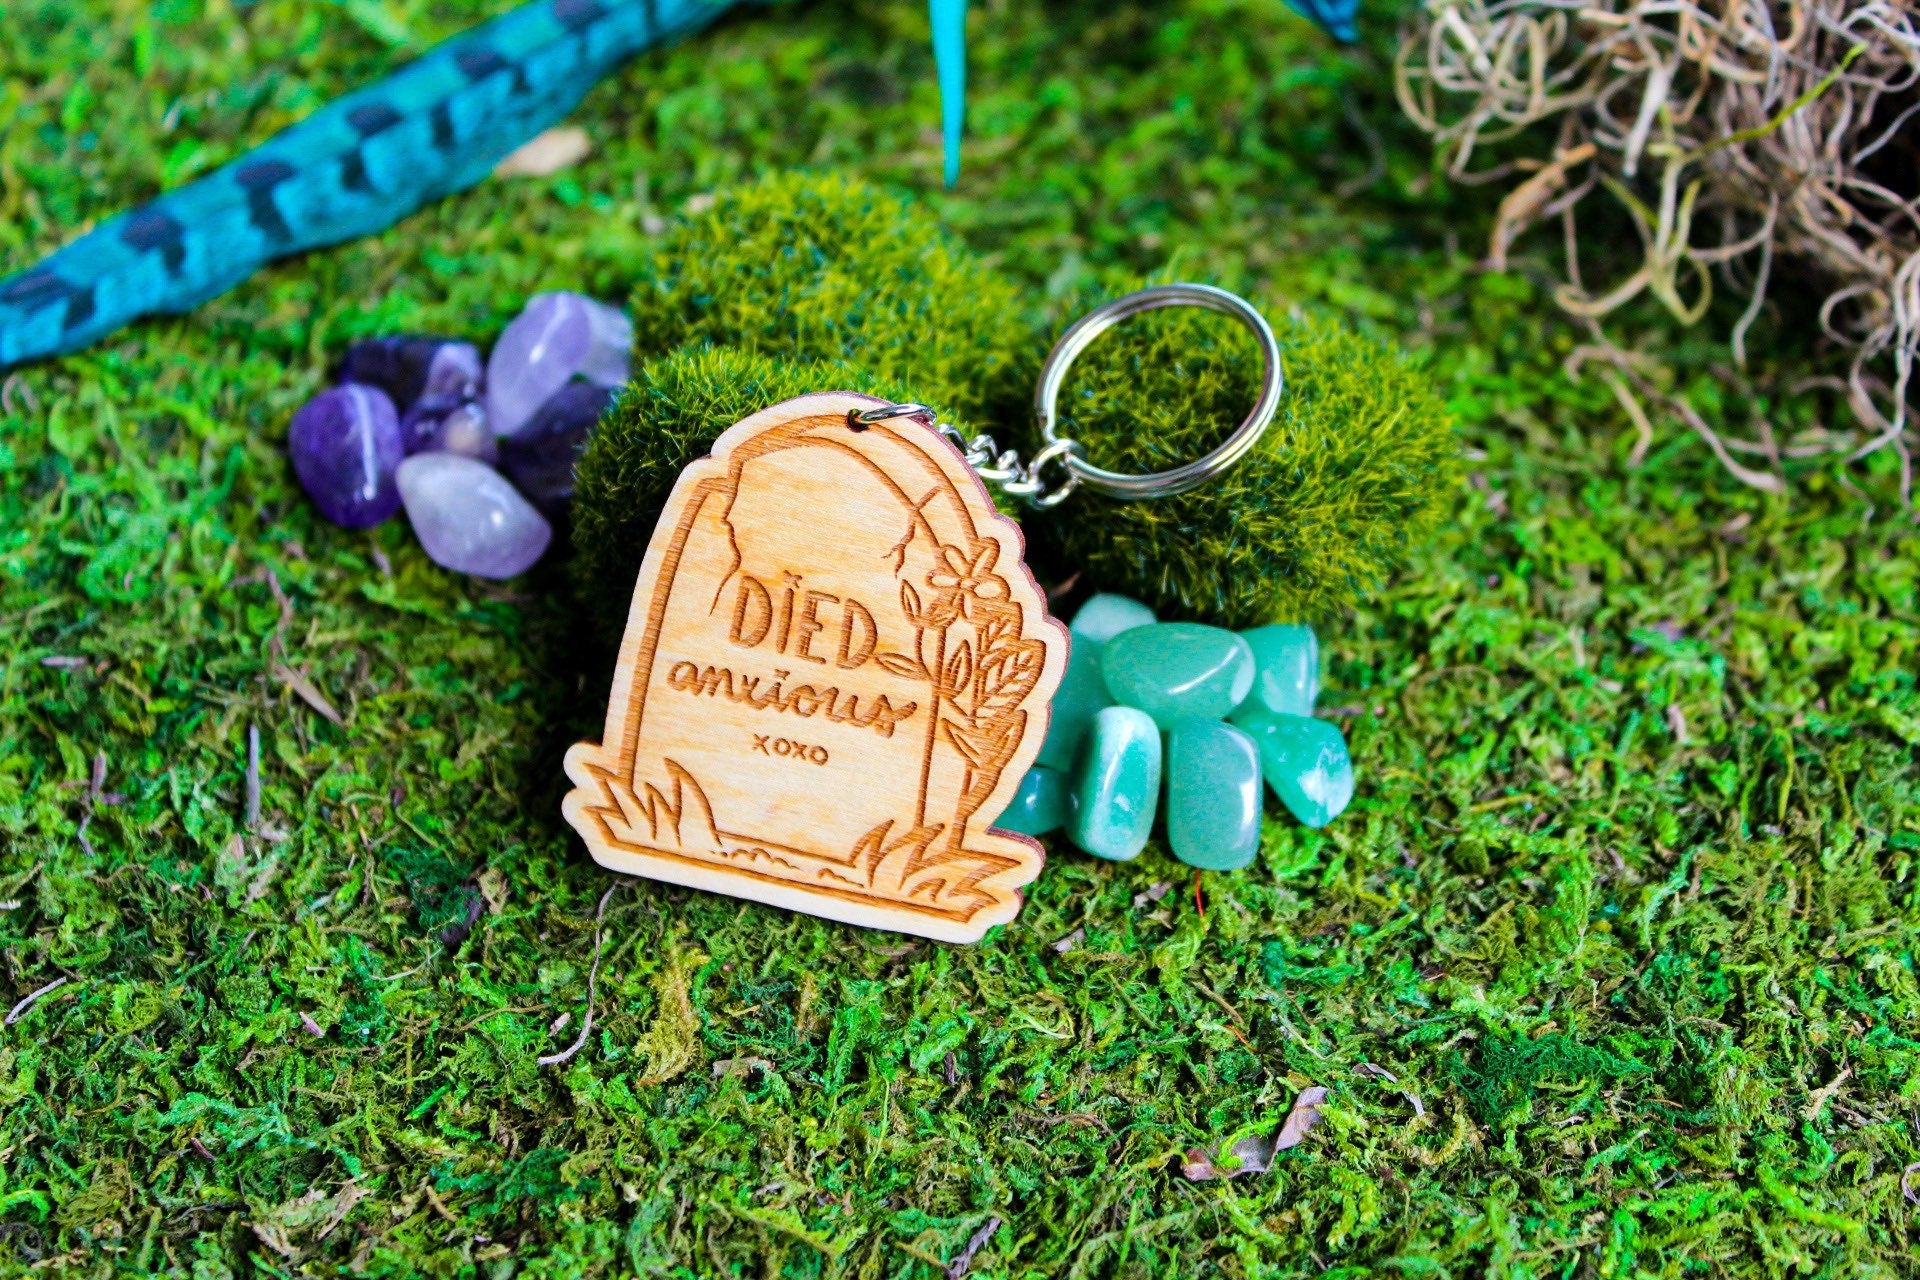 Died Anxious Cute Tombstone Wooden Engraved Keychain Gift For Teen Goth, Anxiety Awareness Keychain Gift For Her